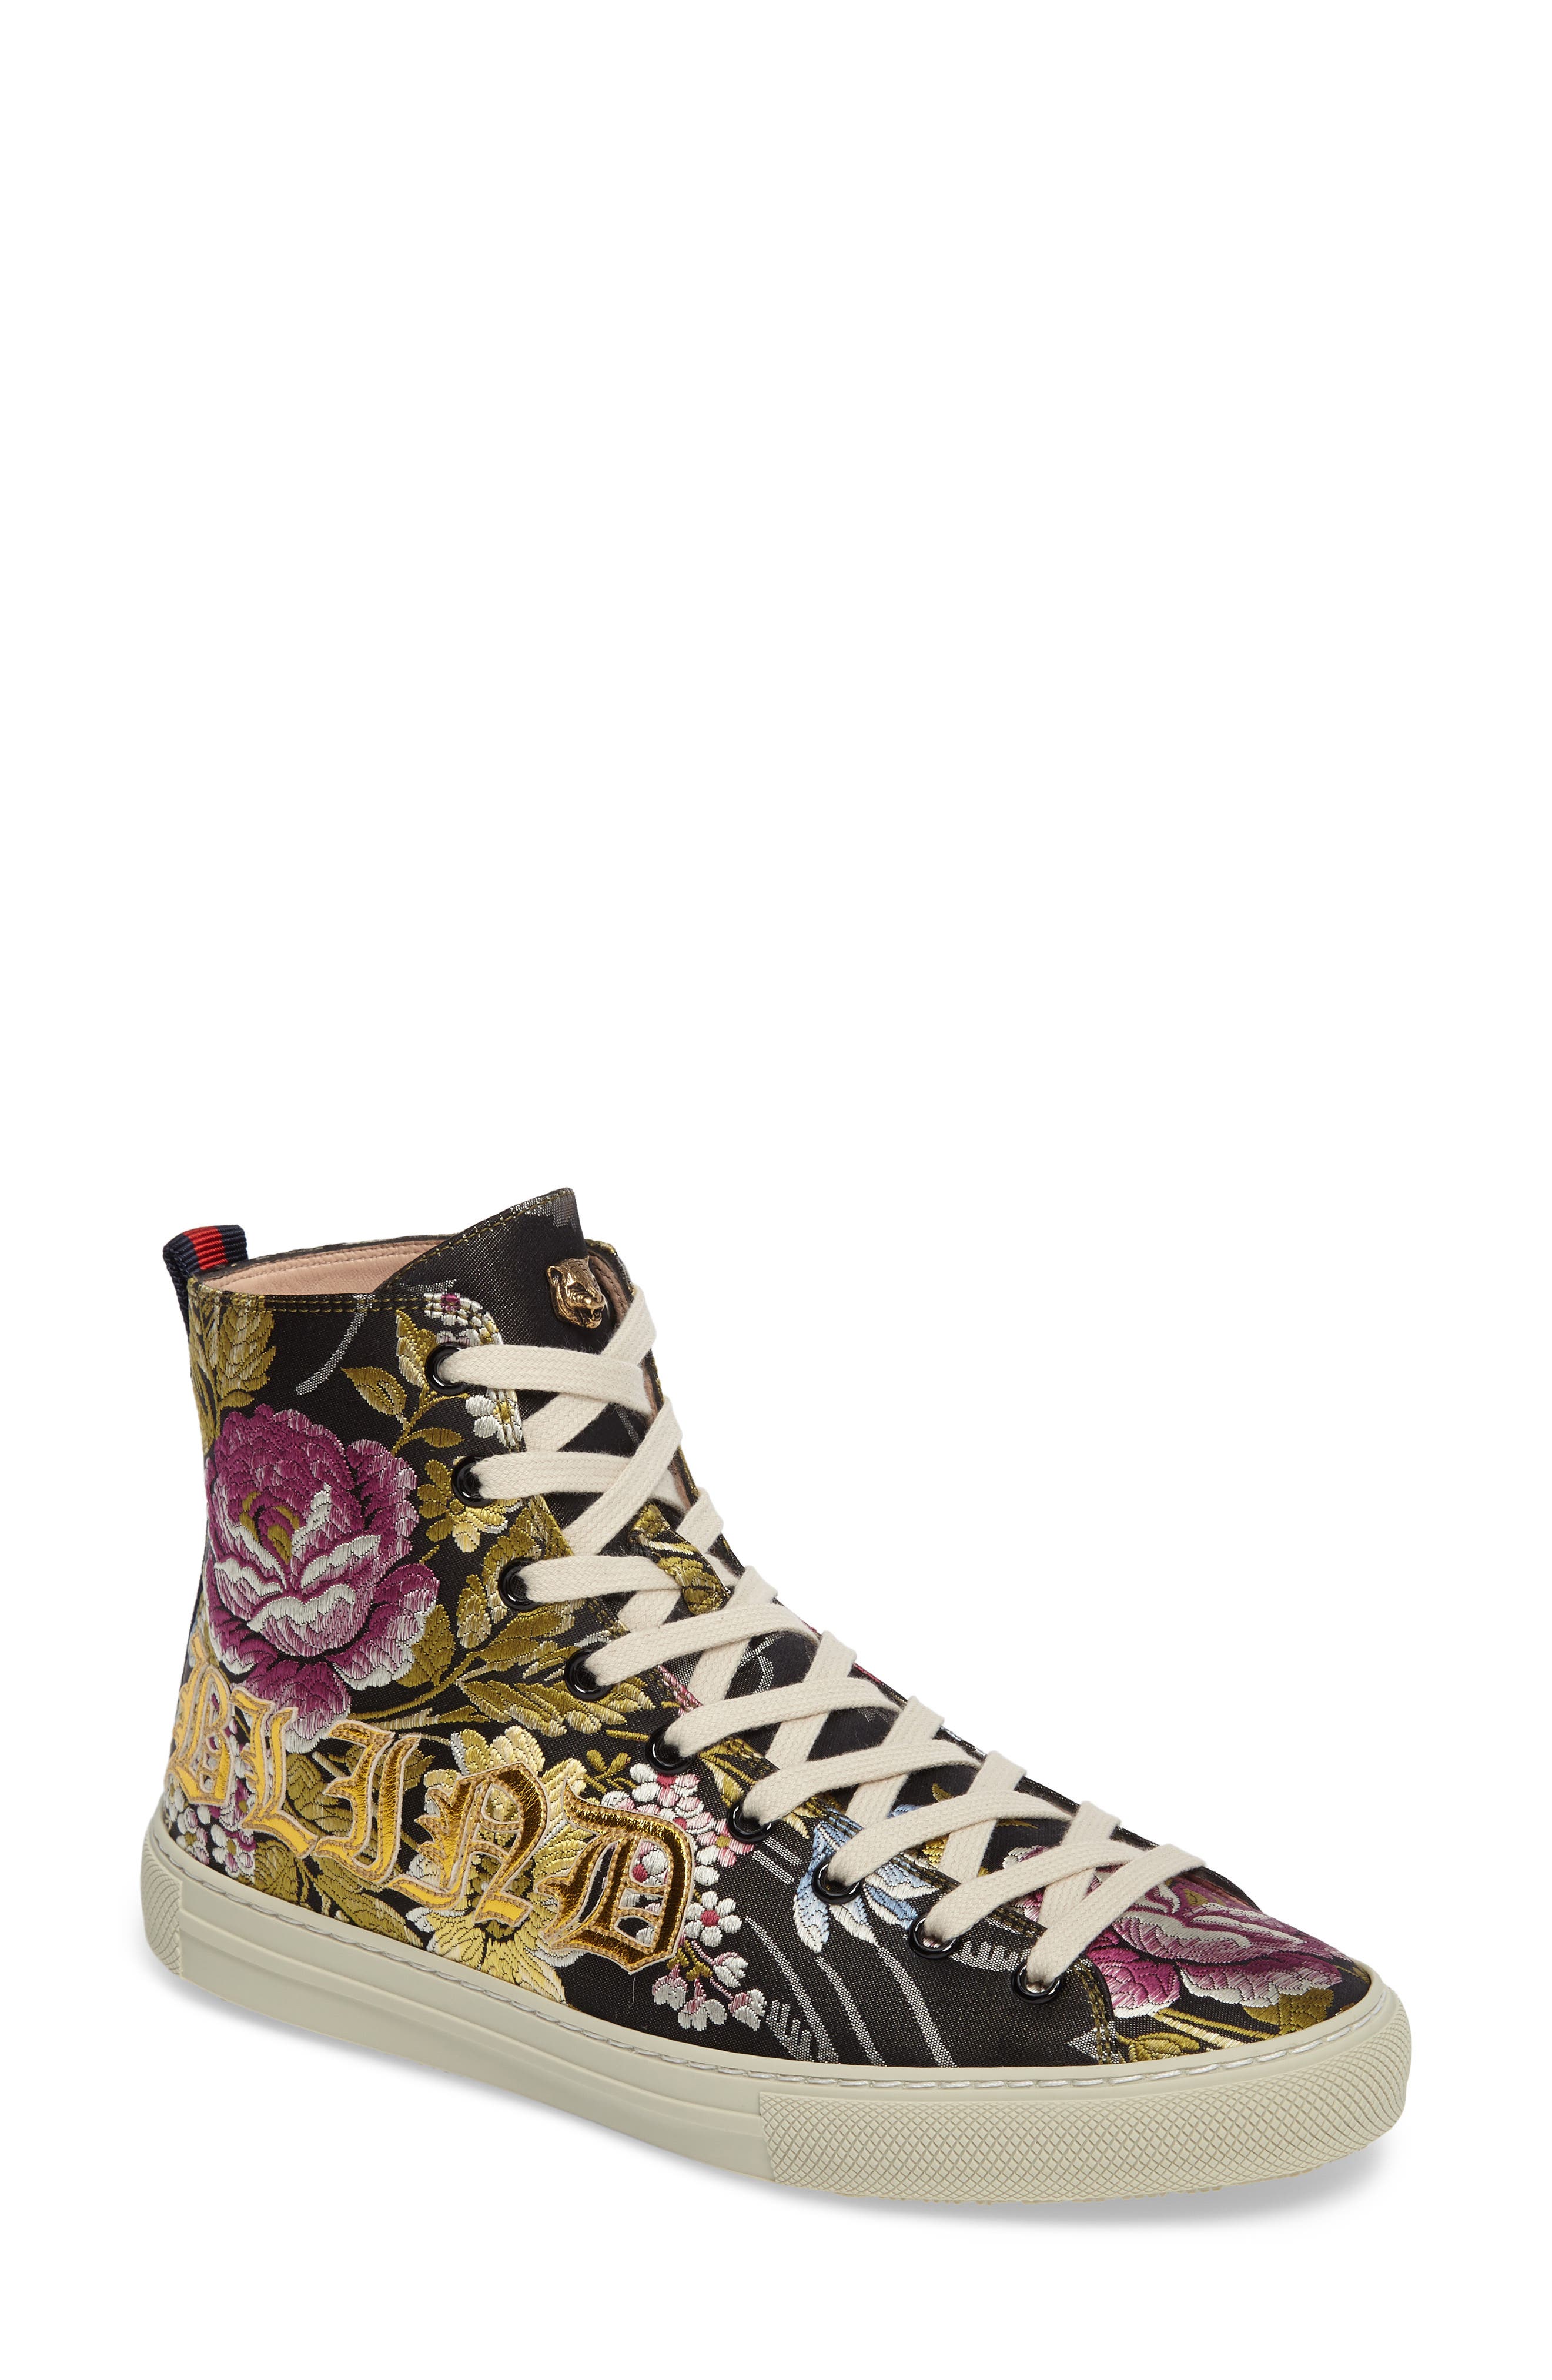 floral high top sneakers